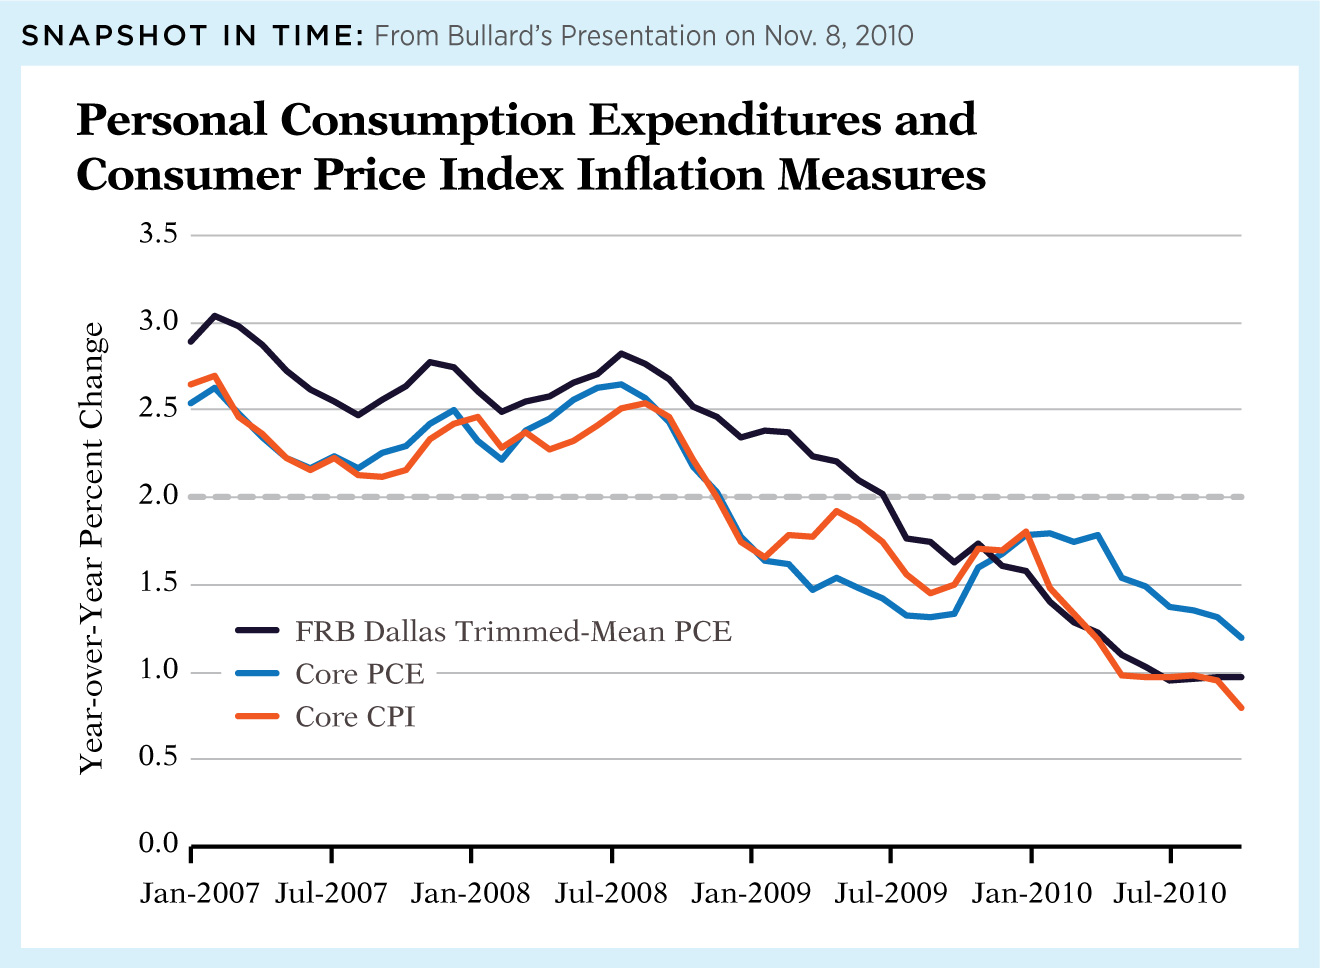 Personal Consumption Expenditures and Consumer Price Index Inflation Measures